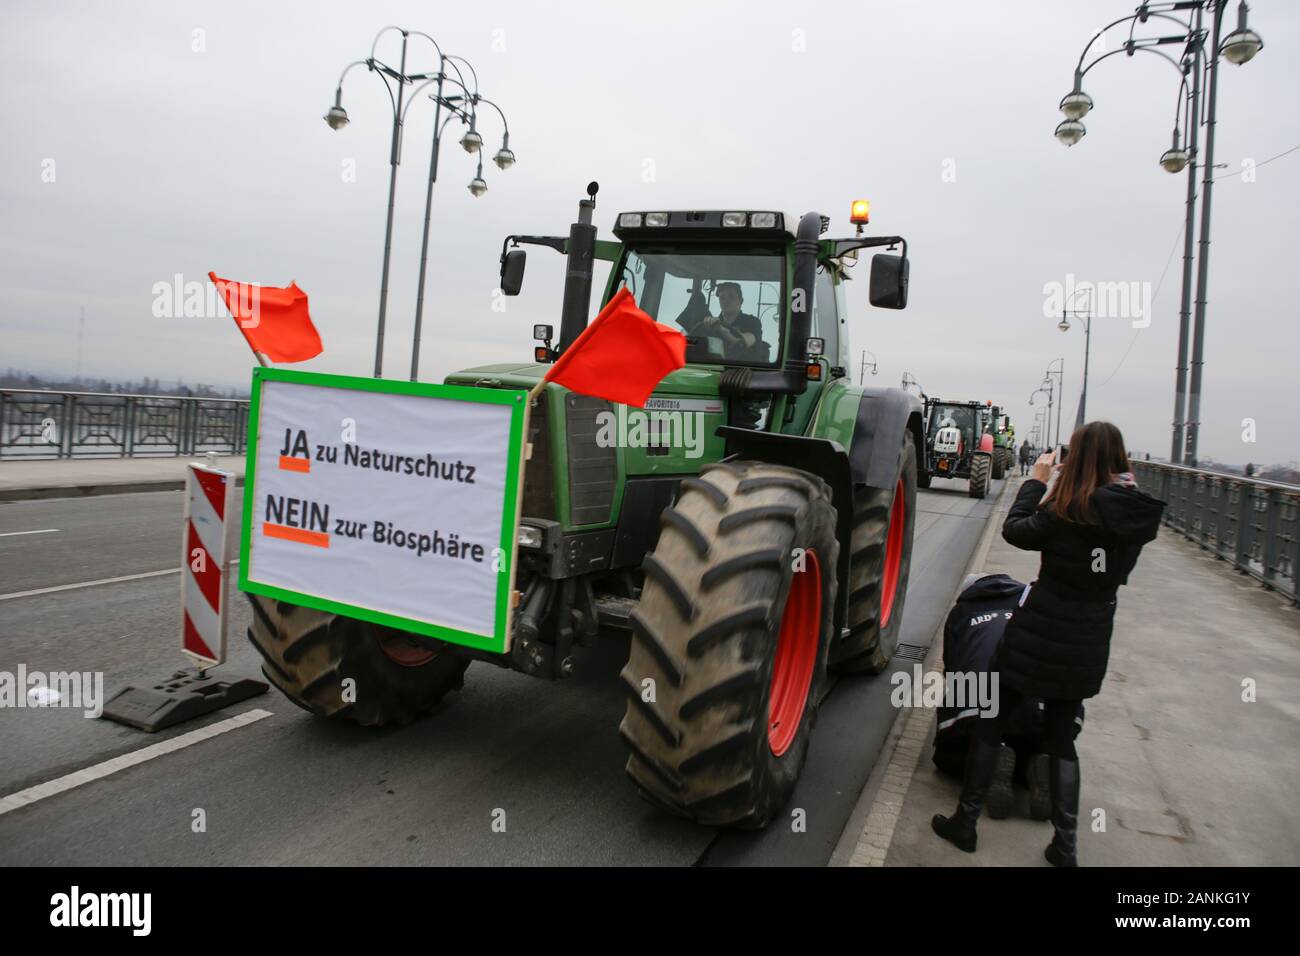 Mainz, Germany. 17th January 2020. Tractors cross the Theodor-Heuss-Bridge from Hesse into Mainz. A poster that reads “Yes to conservation - No to biosphere” hangs on the front of a tractor. Over 800 farmers with their tractor protested outside the ZDF TV station in Mainz against the media reporting of the agricultural politics. Afterwards they try to create the world wide longest mobile tractor chain by driving from the TV station through Rhenish Hesse, to protest against the new fertiliser regulations. Stock Photo